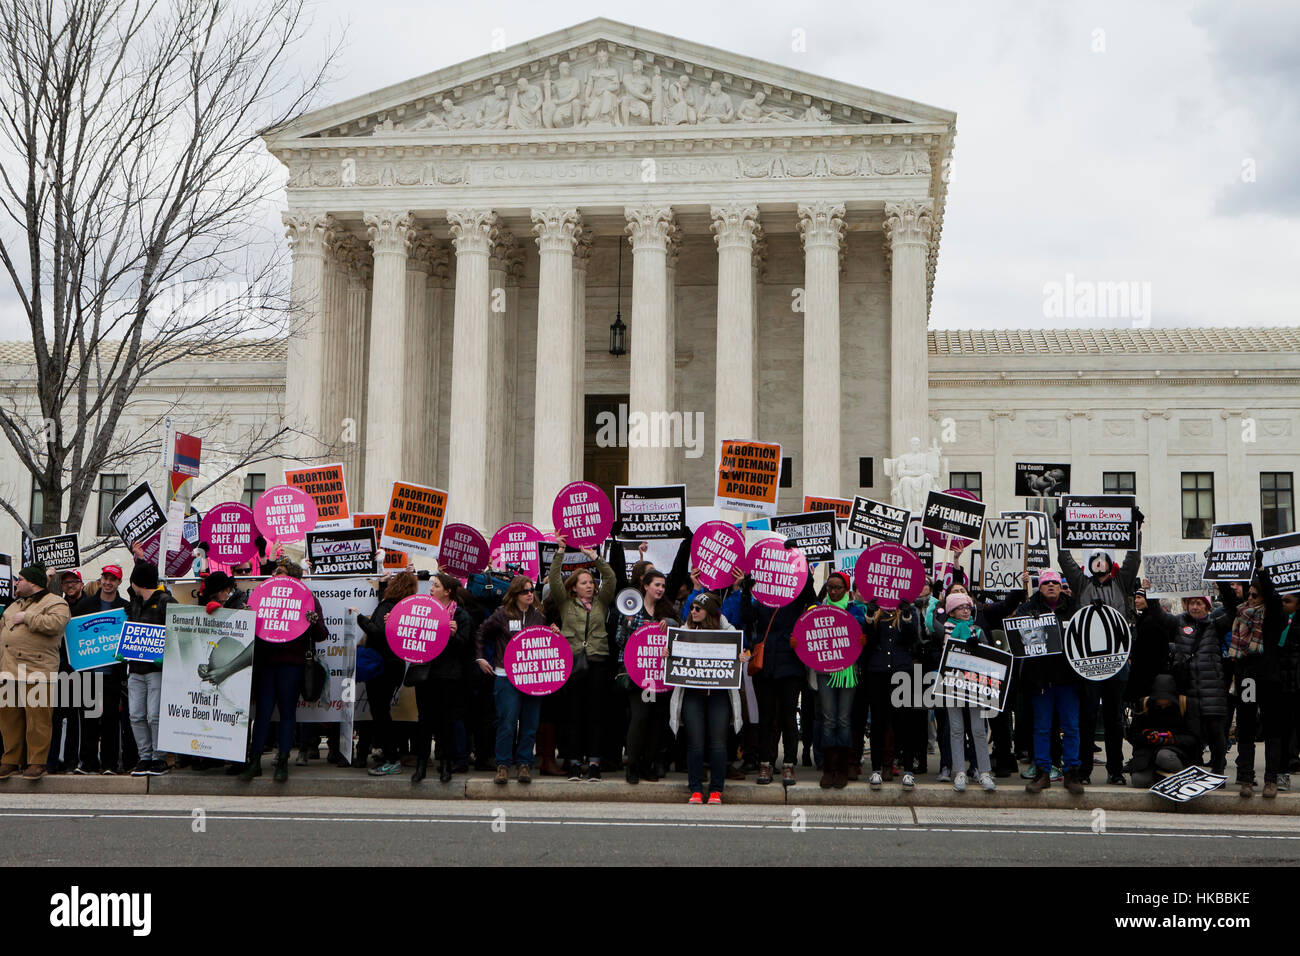 Washington, DC, USA. 27th January, 2017.Thousands of pro-life activists march from the National Mall to the Supreme Court building for the annual Pro-Life March.  Many pro-choice activists also gather in front of the Supreme Court, where both sides protest side by side. Credit: B Christopher/Alamy Live News Stock Photo